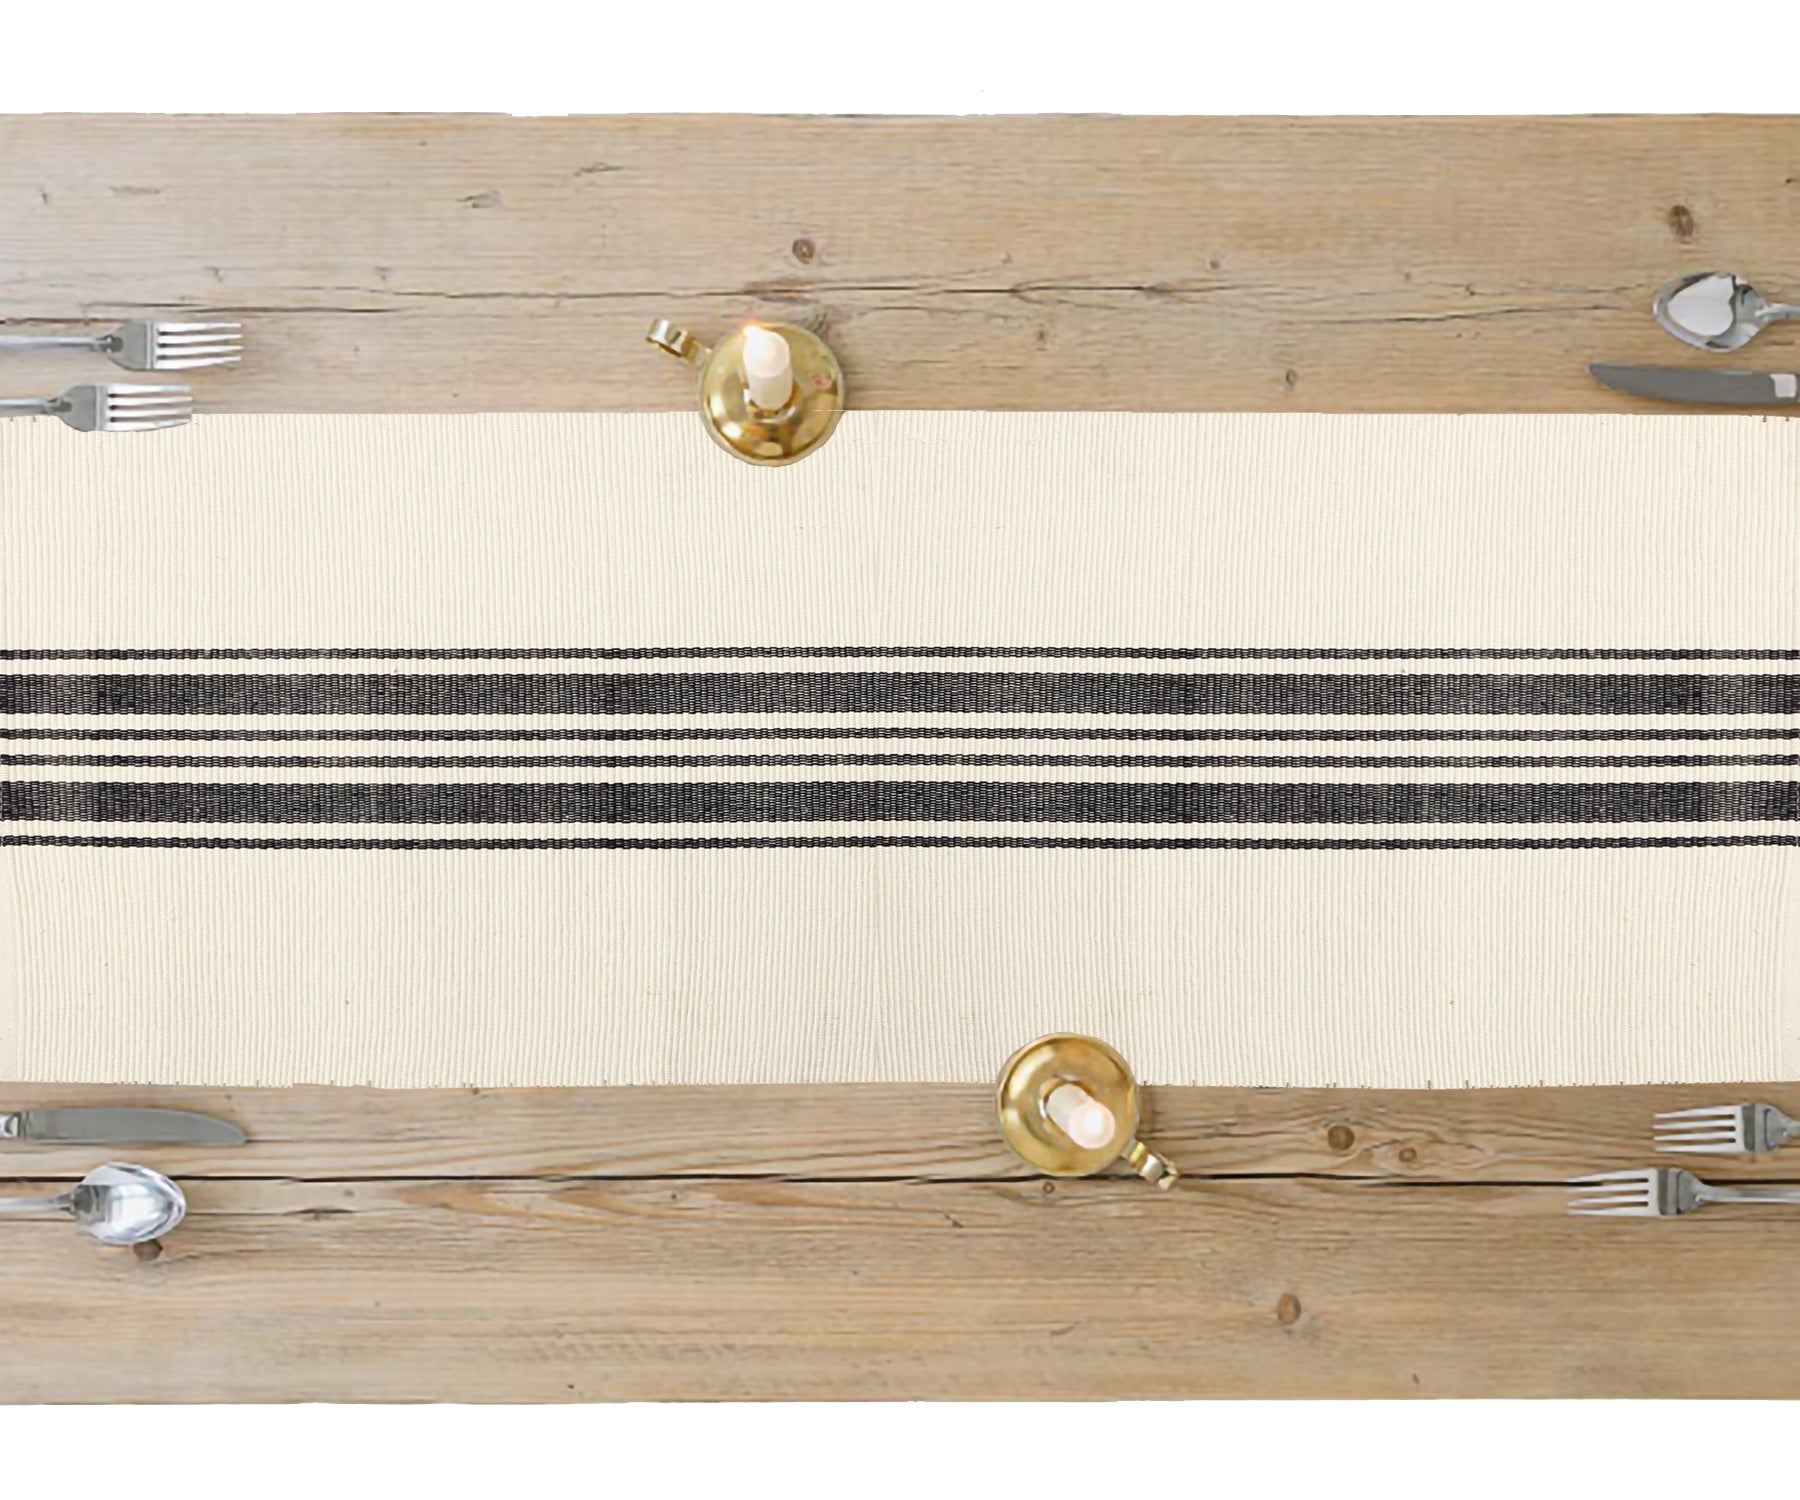 Elegant dining table runner with farmhouse appeal.